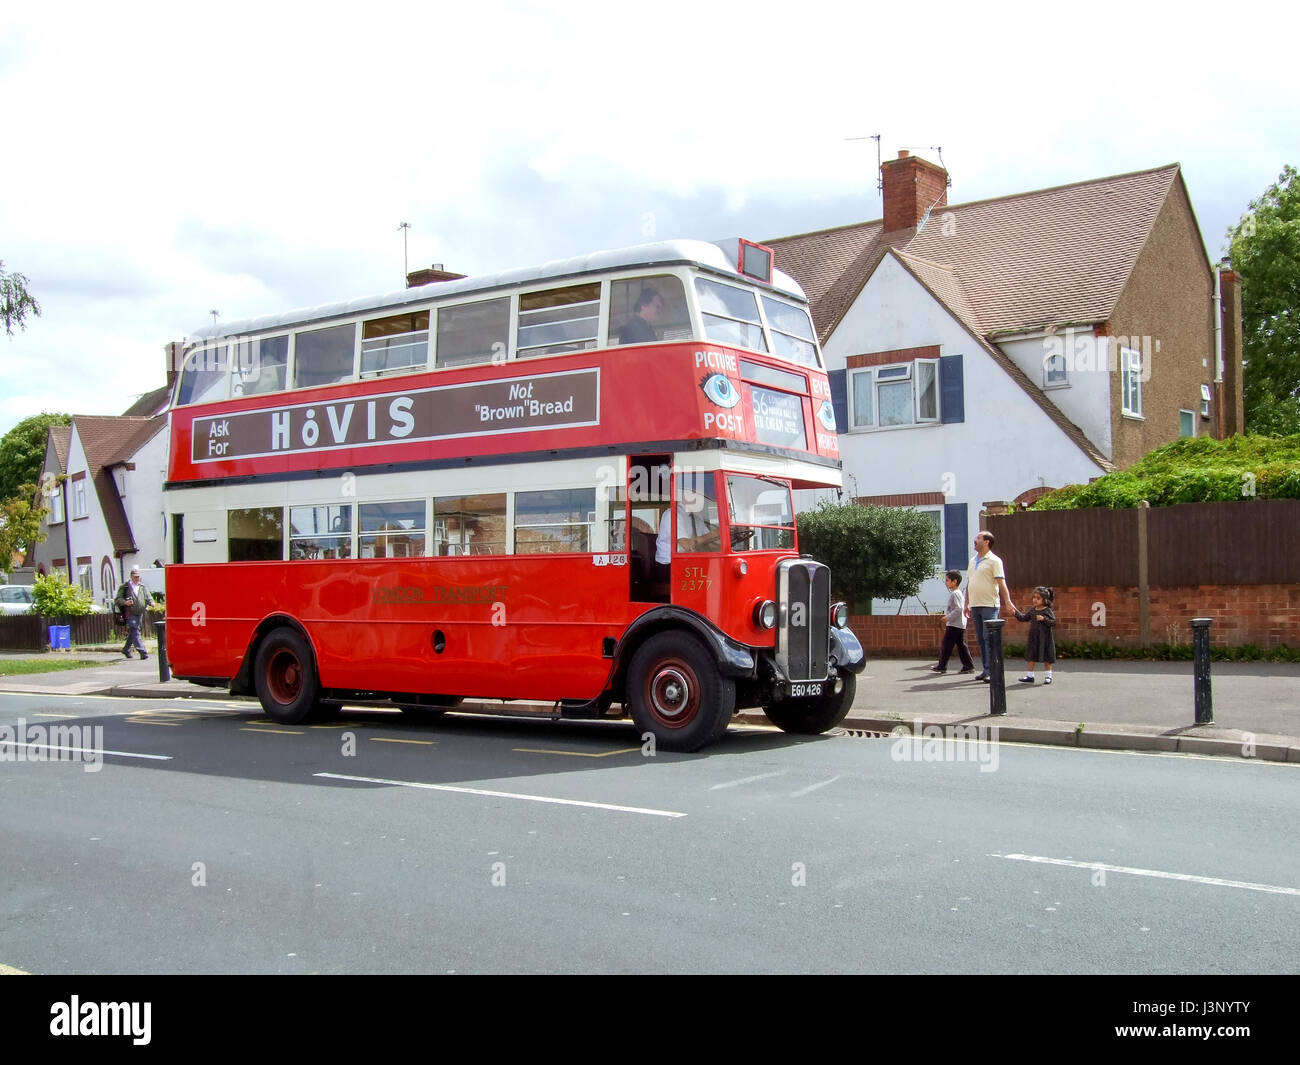 1937 AEC Regent I bus STL2377 in London Transport livery with Hovis advertisement, North Cheam, Greater London, UK, 2008 Stock Photo